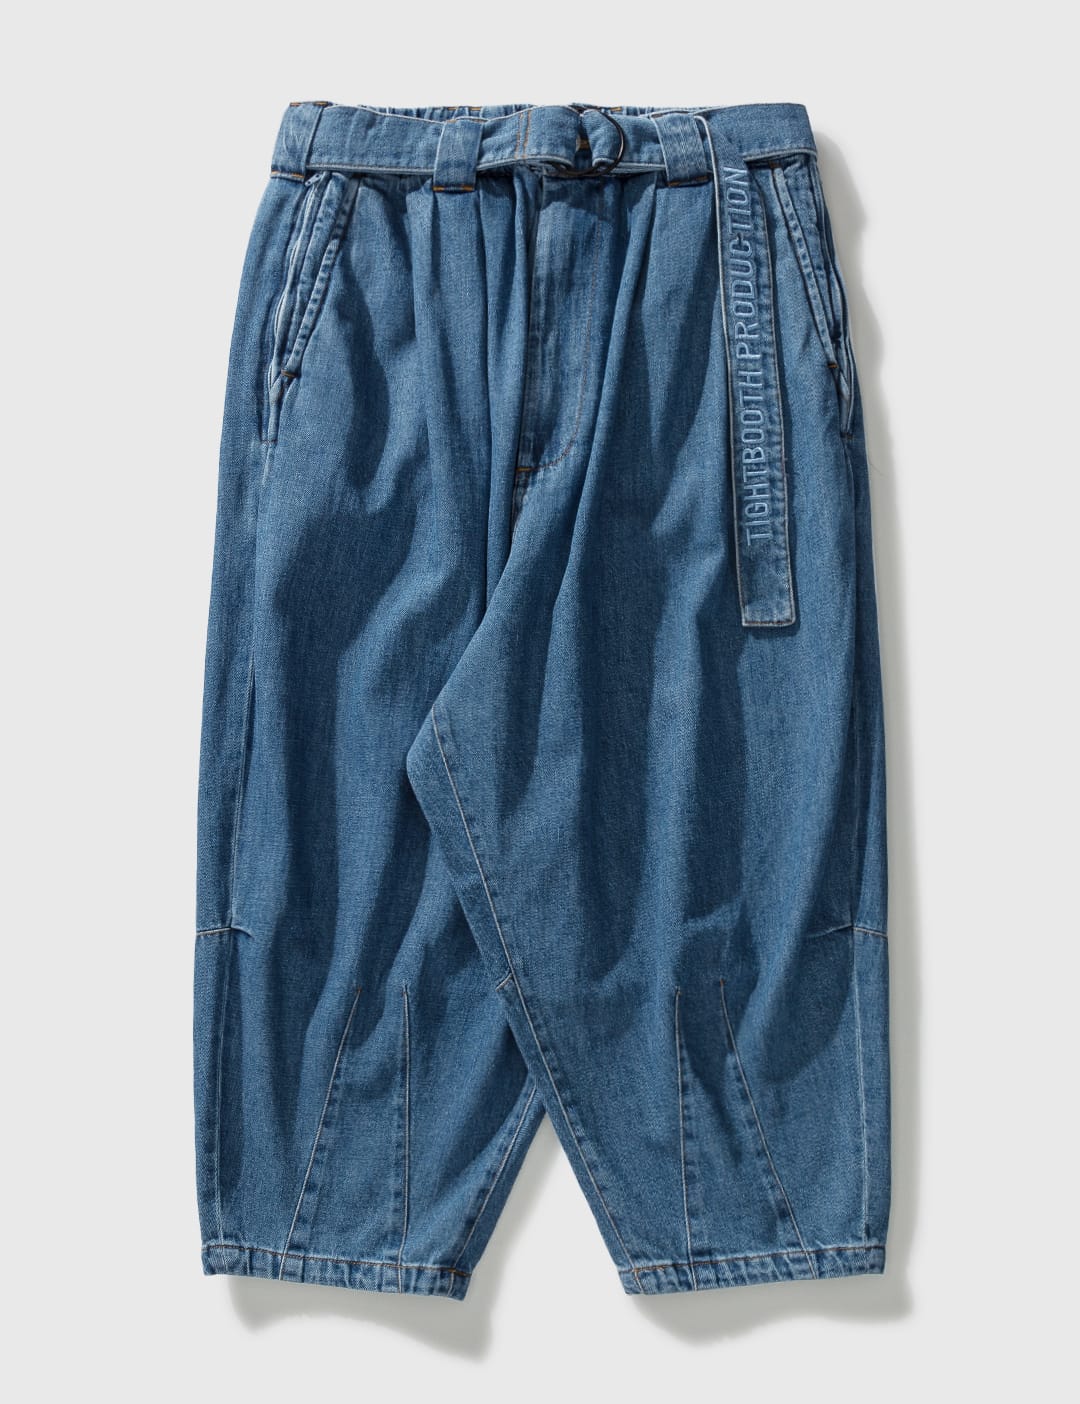 TIGHTBOOTH - DENIM CROPPED PANTS | HBX - Globally Curated Fashion